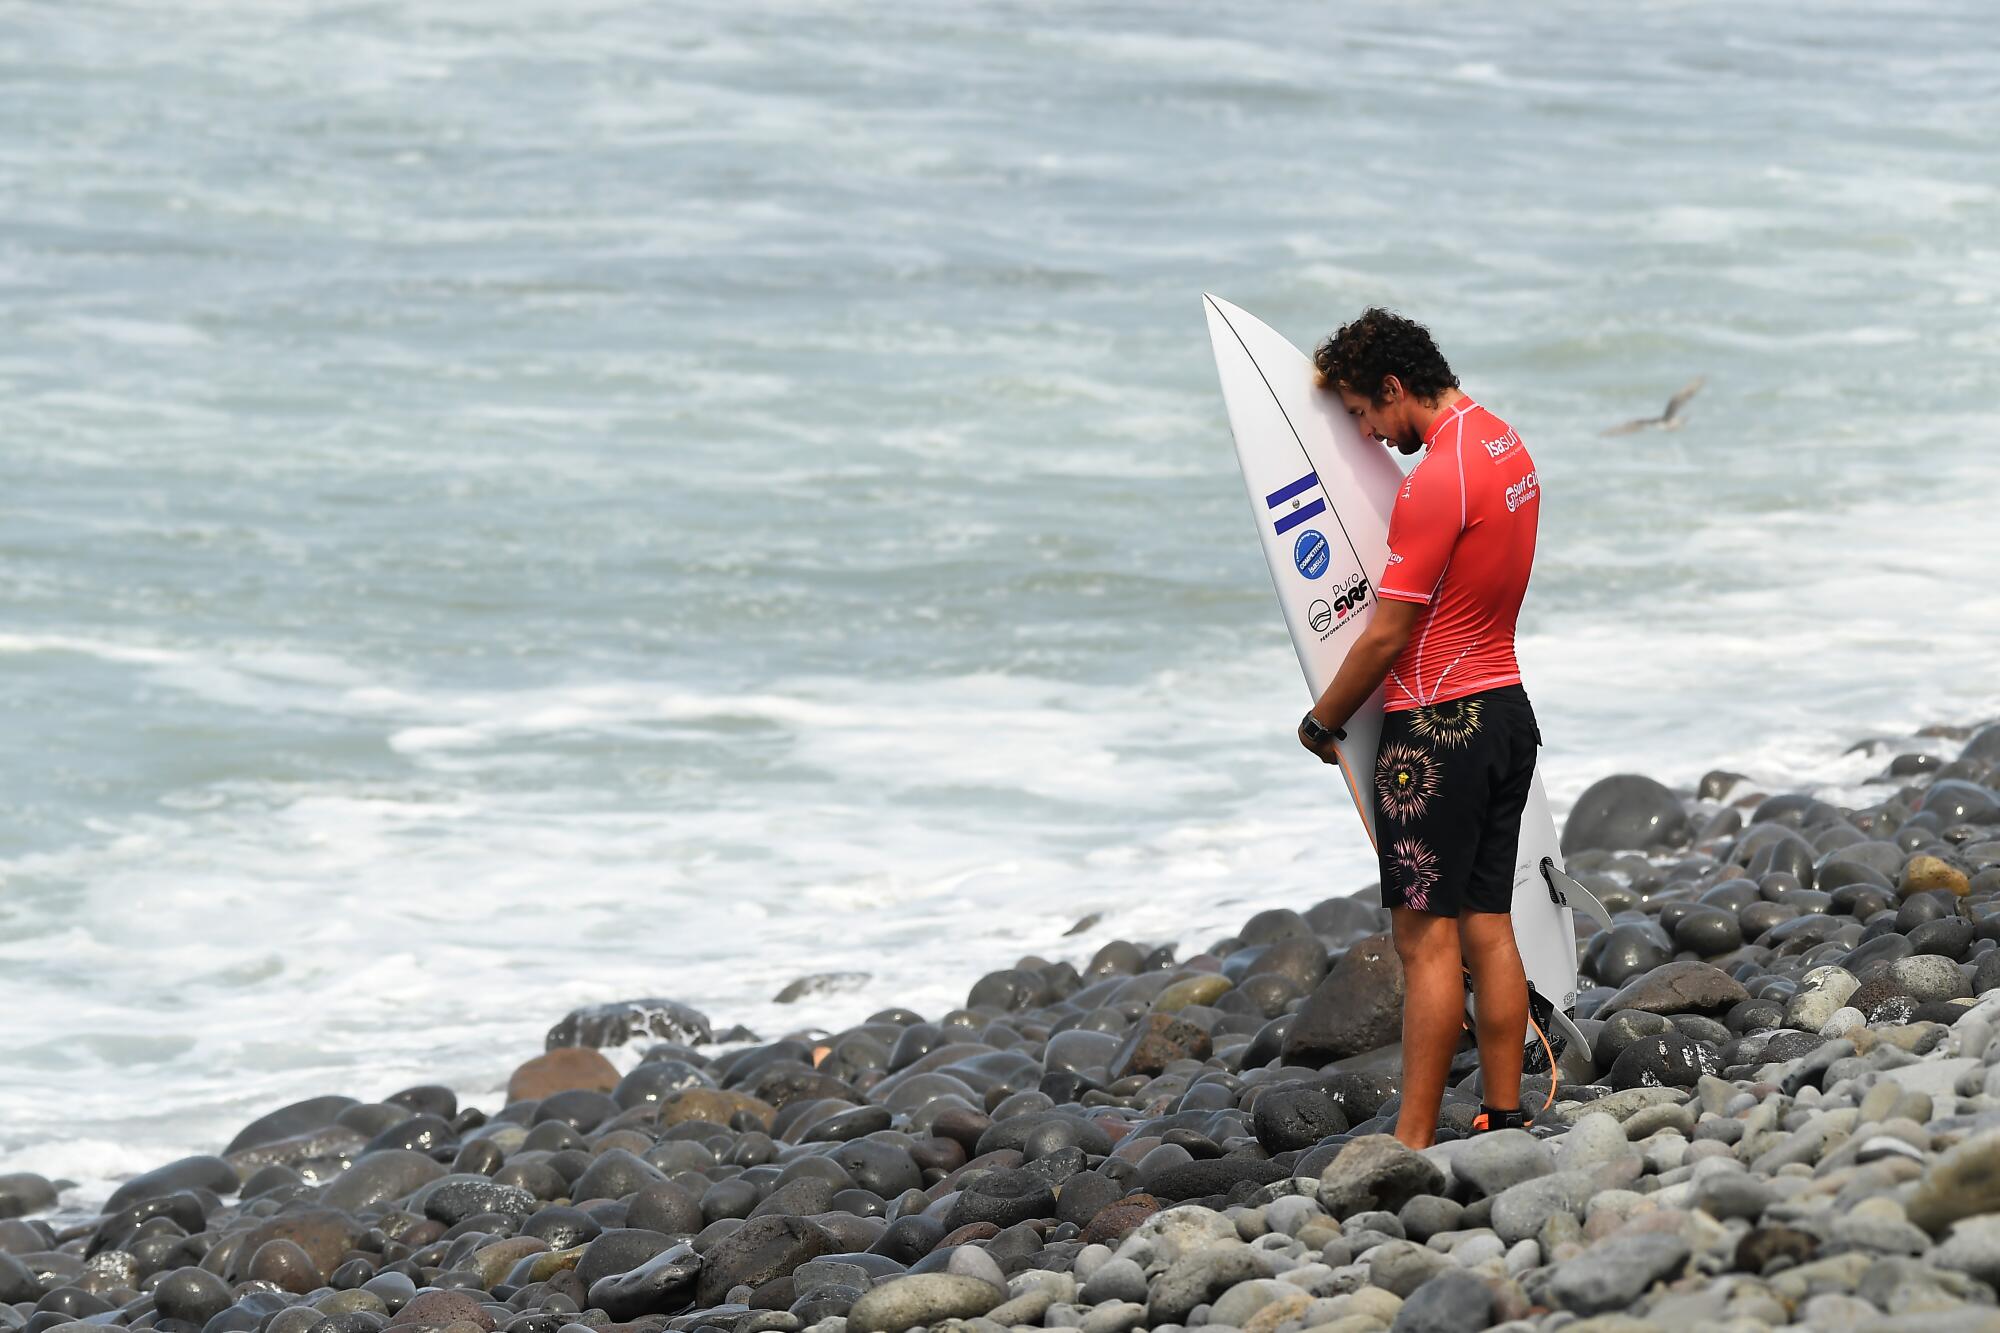 Surfer Bryan Perez prays before competing in the ISA World Surfing Games in El Salvador.